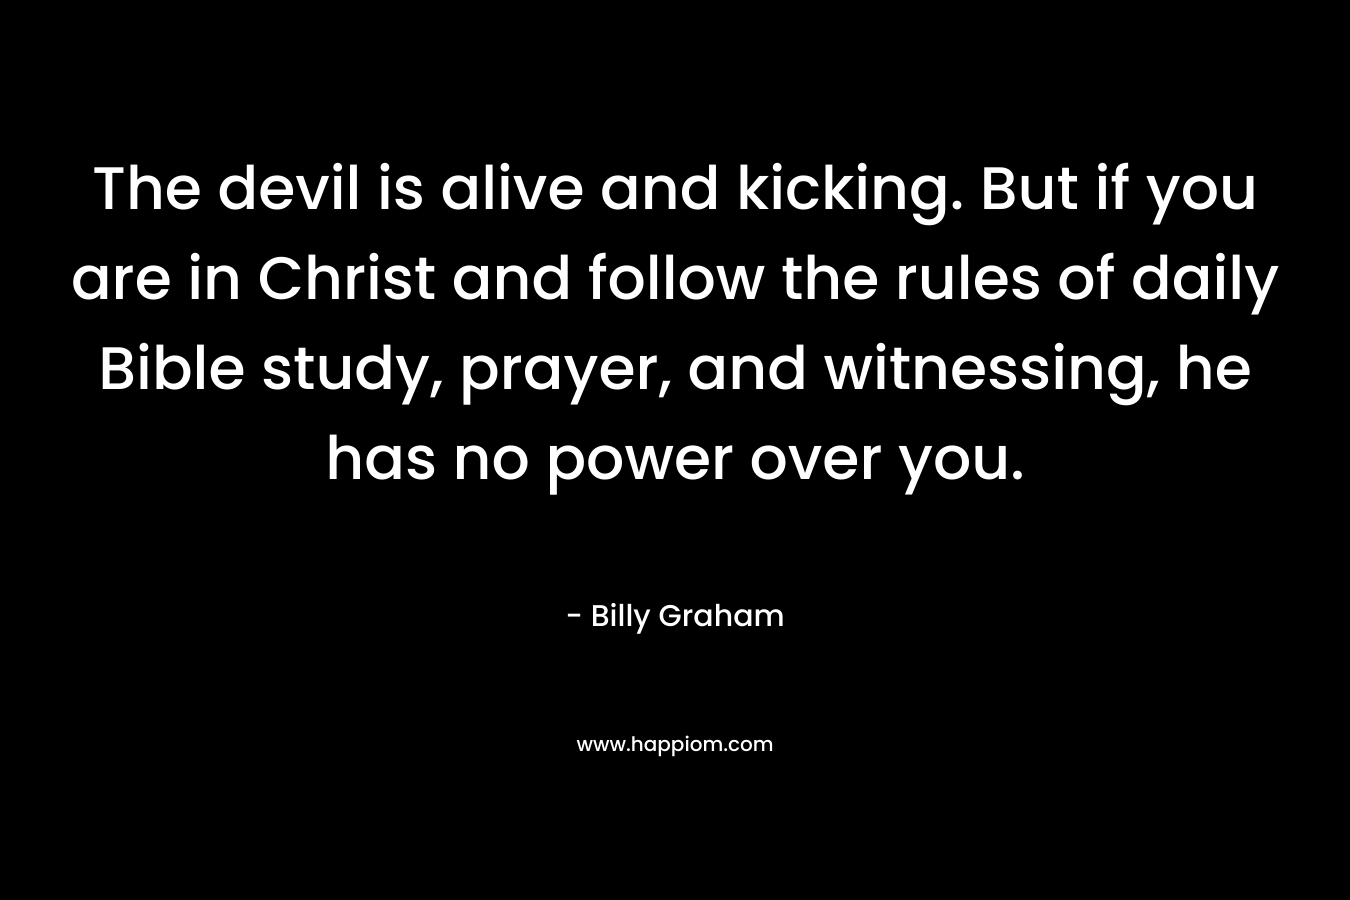 The devil is alive and kicking. But if you are in Christ and follow the rules of daily Bible study, prayer, and witnessing, he has no power over you. – Billy Graham